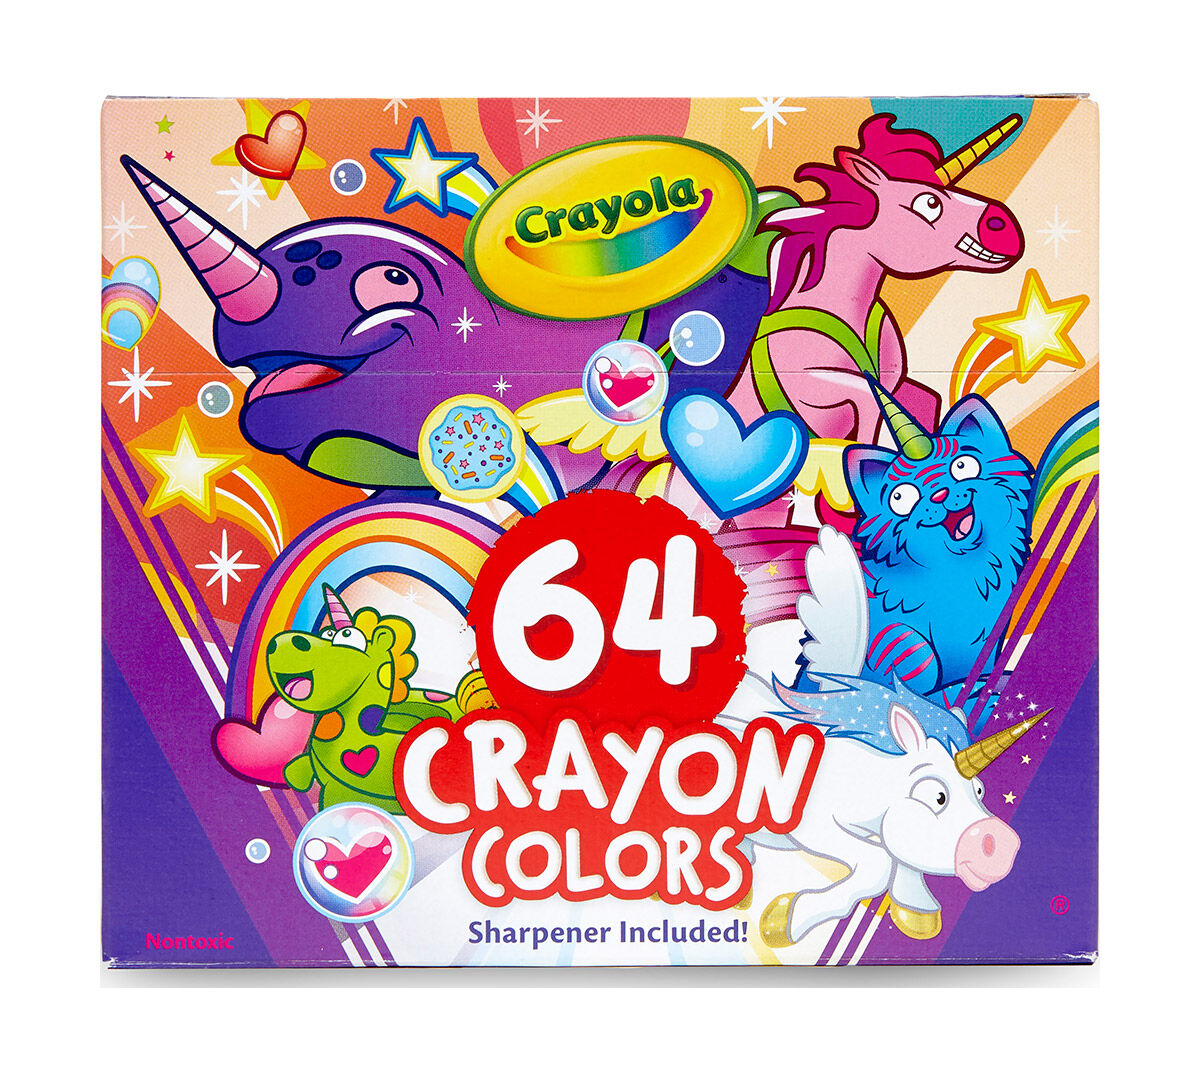 6 7 Unicorn Gift for Kids 4 Age 3 64 Count Crayola Uni-Creatures Coloring Pages with Custom Crayon Set 5 